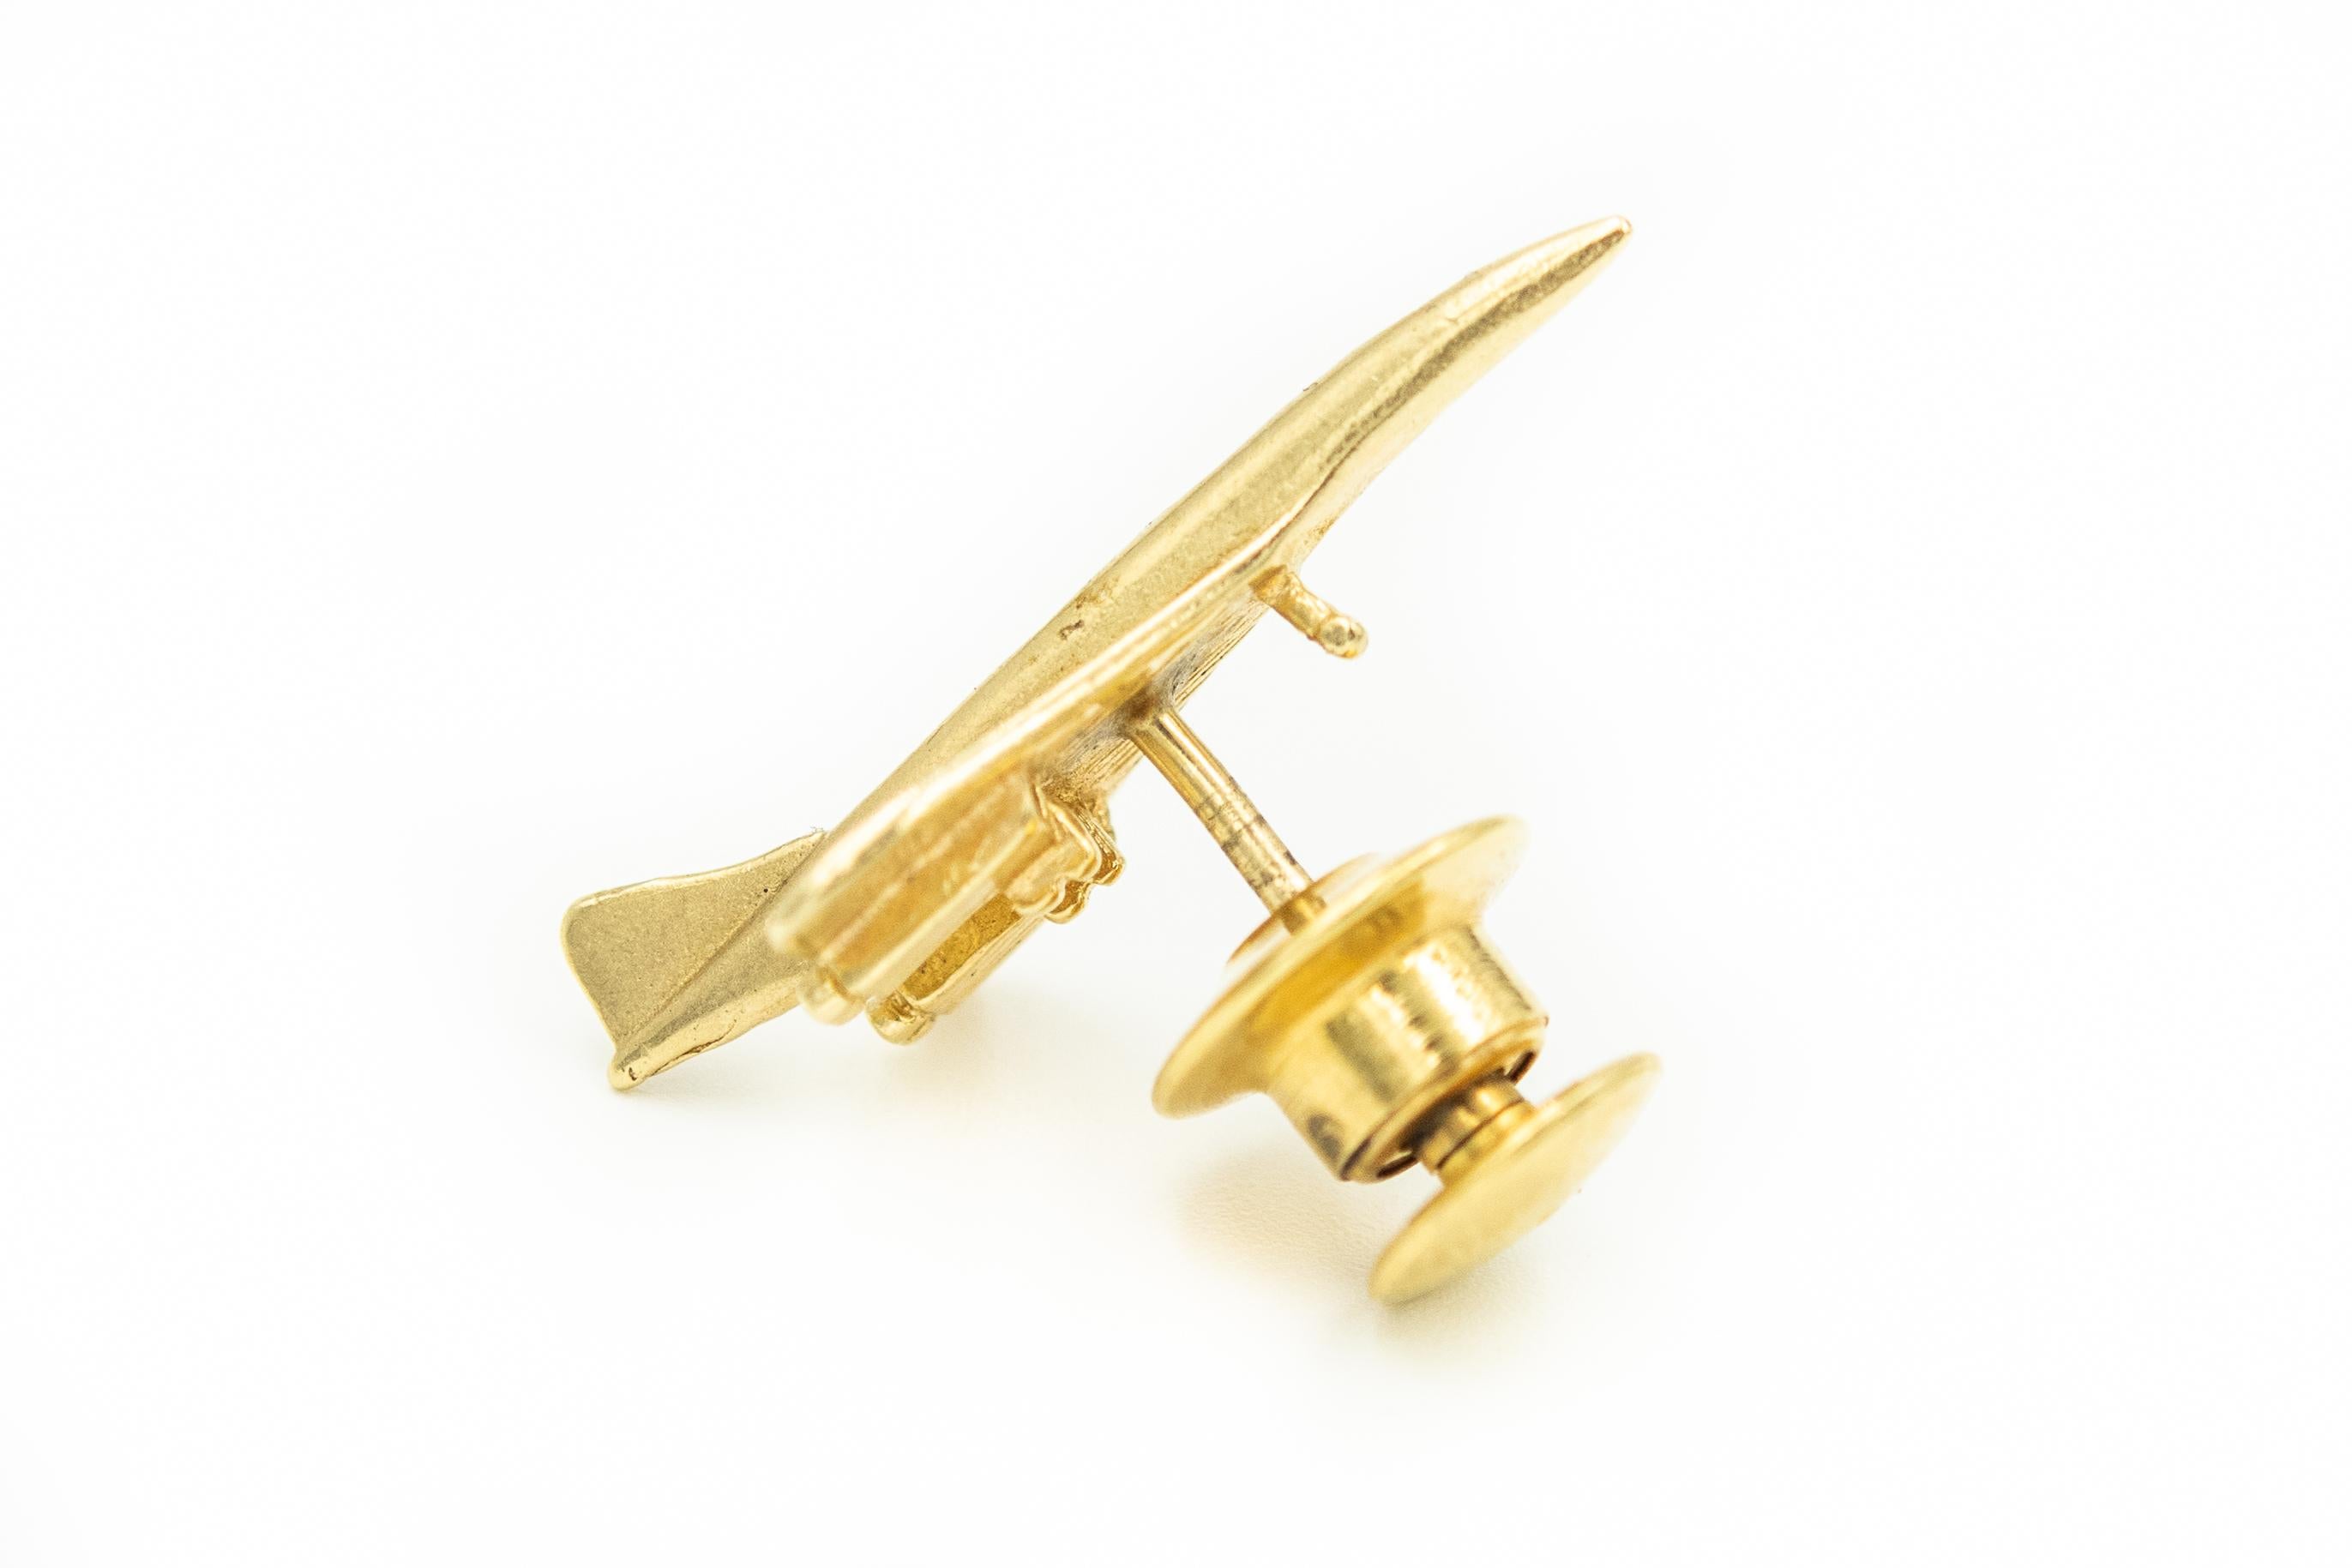 This would be a perfect gift for a pilot, traveler or airplane enthusiast. The pin is a 14k yellow gold concord plane with an etched design. The back fastener is gold plated.